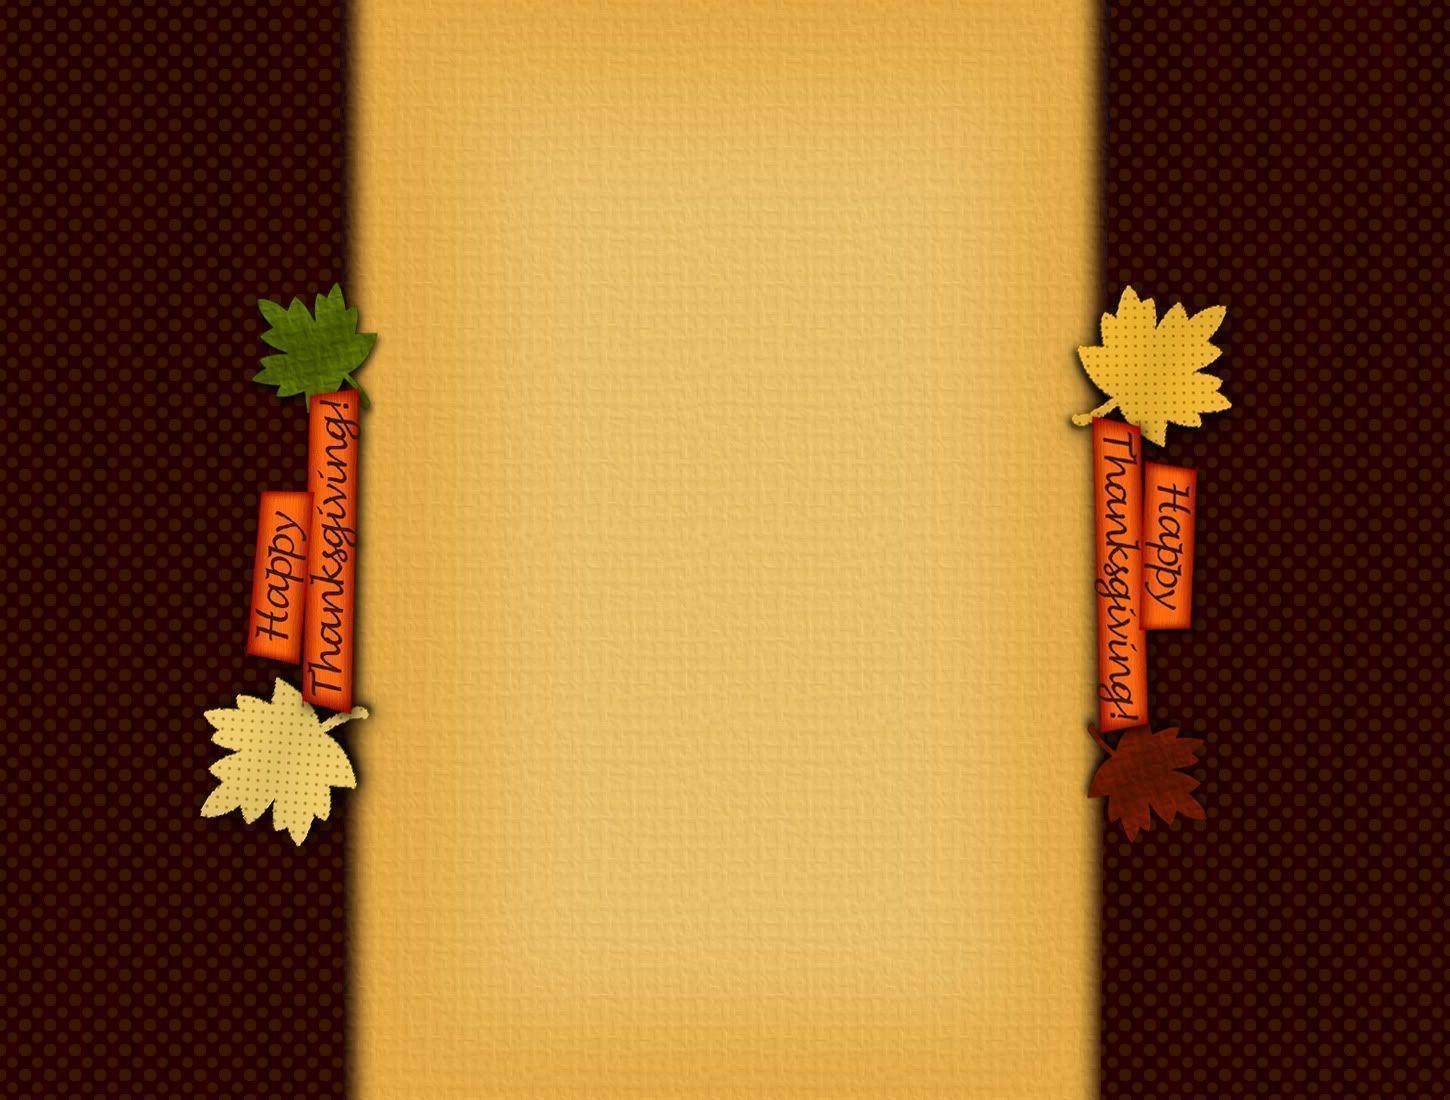 Ashley&Blog Layouts/Backgrounds Layouts: Happy Thanksgiving!